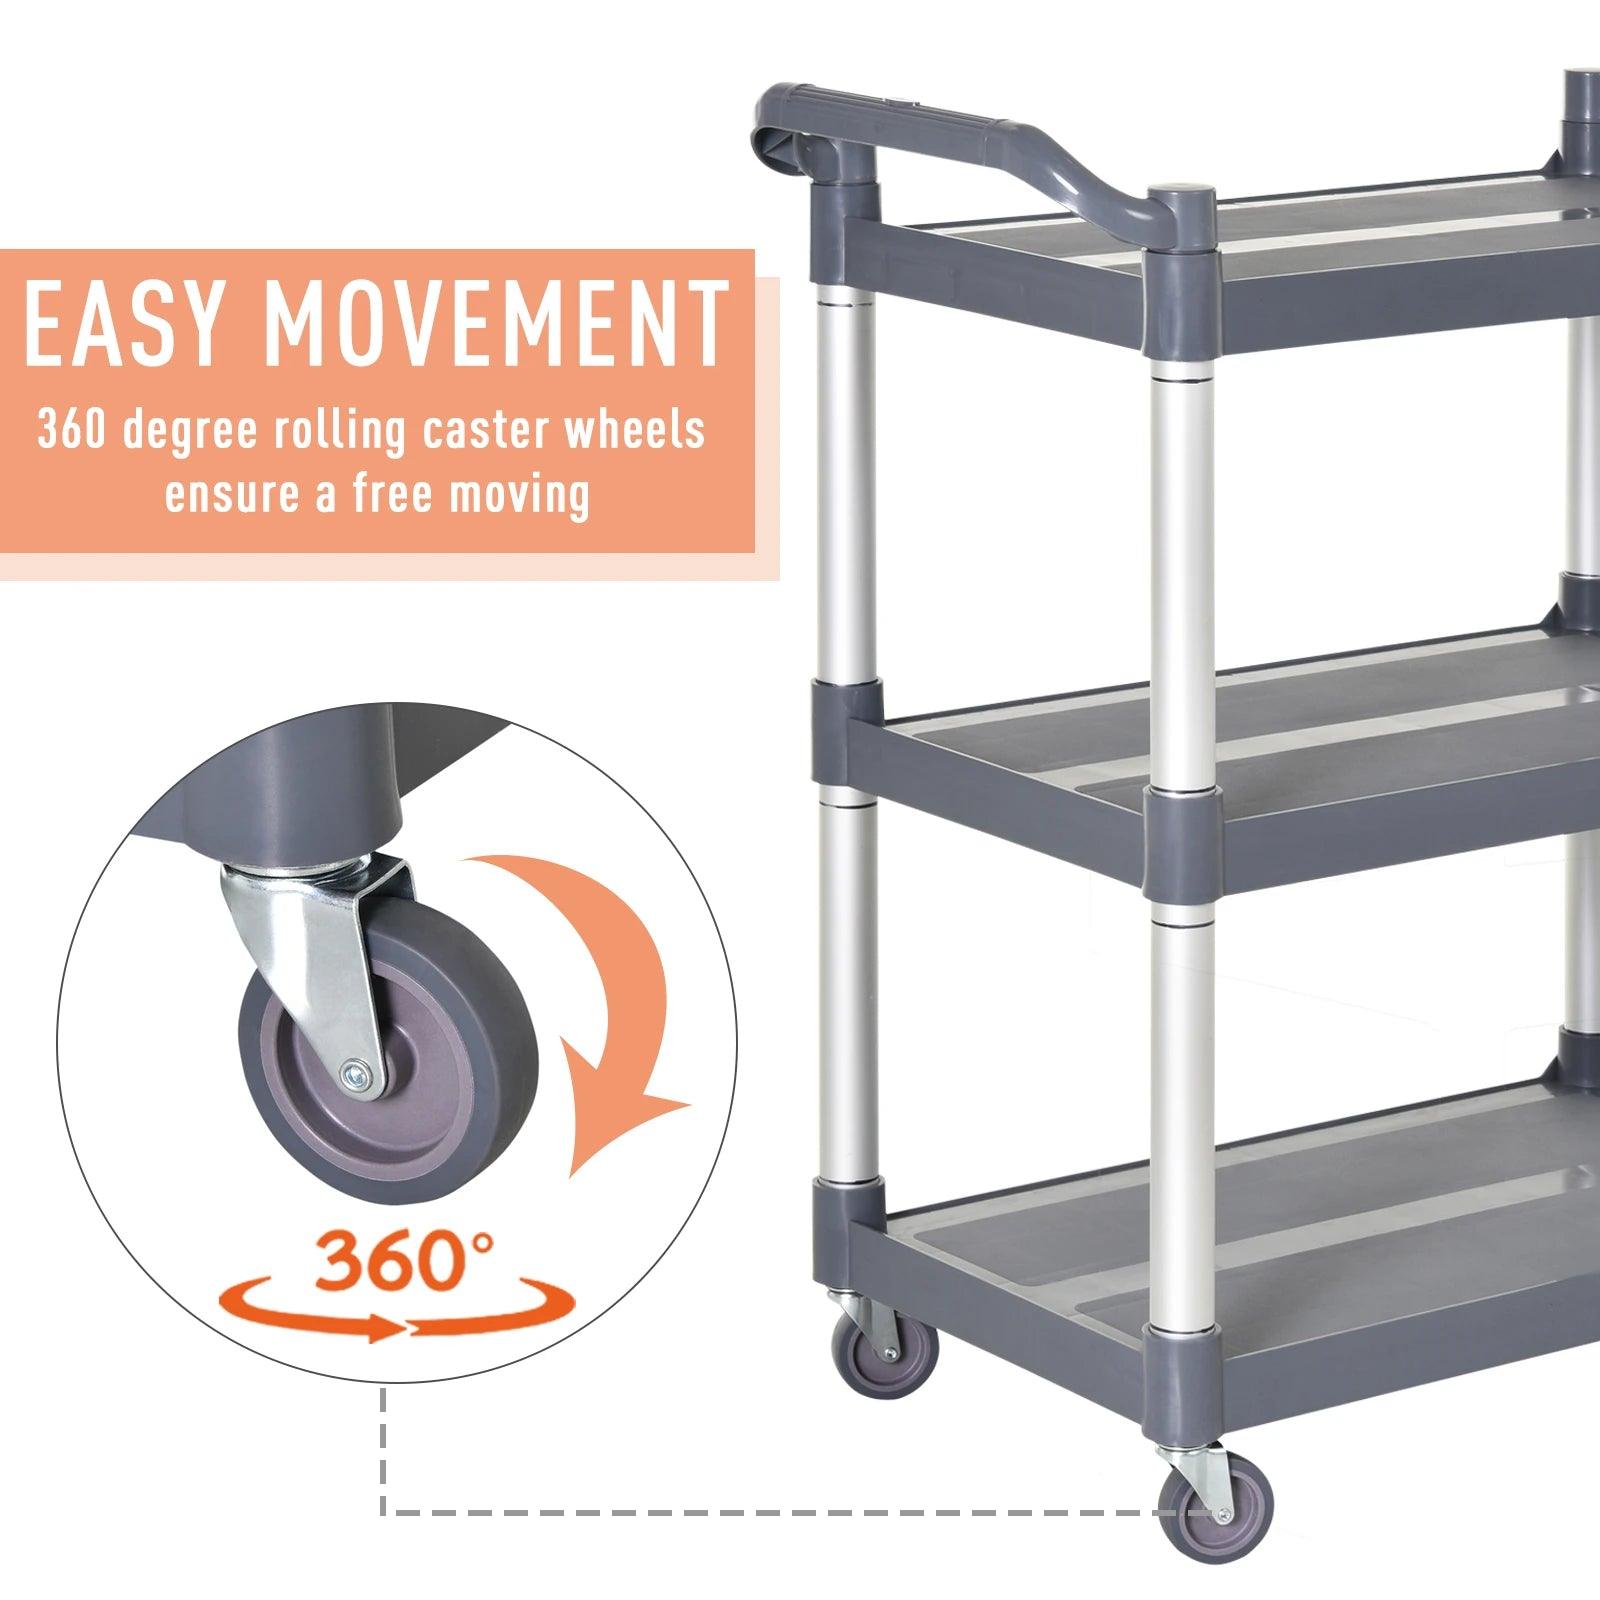 3-Tier Utility Cart Large Rolling Storage Trolley with 3 Shelves Metal Clean Service Cart, Restaurant, Hotel, Livingroom, Silver and Grey